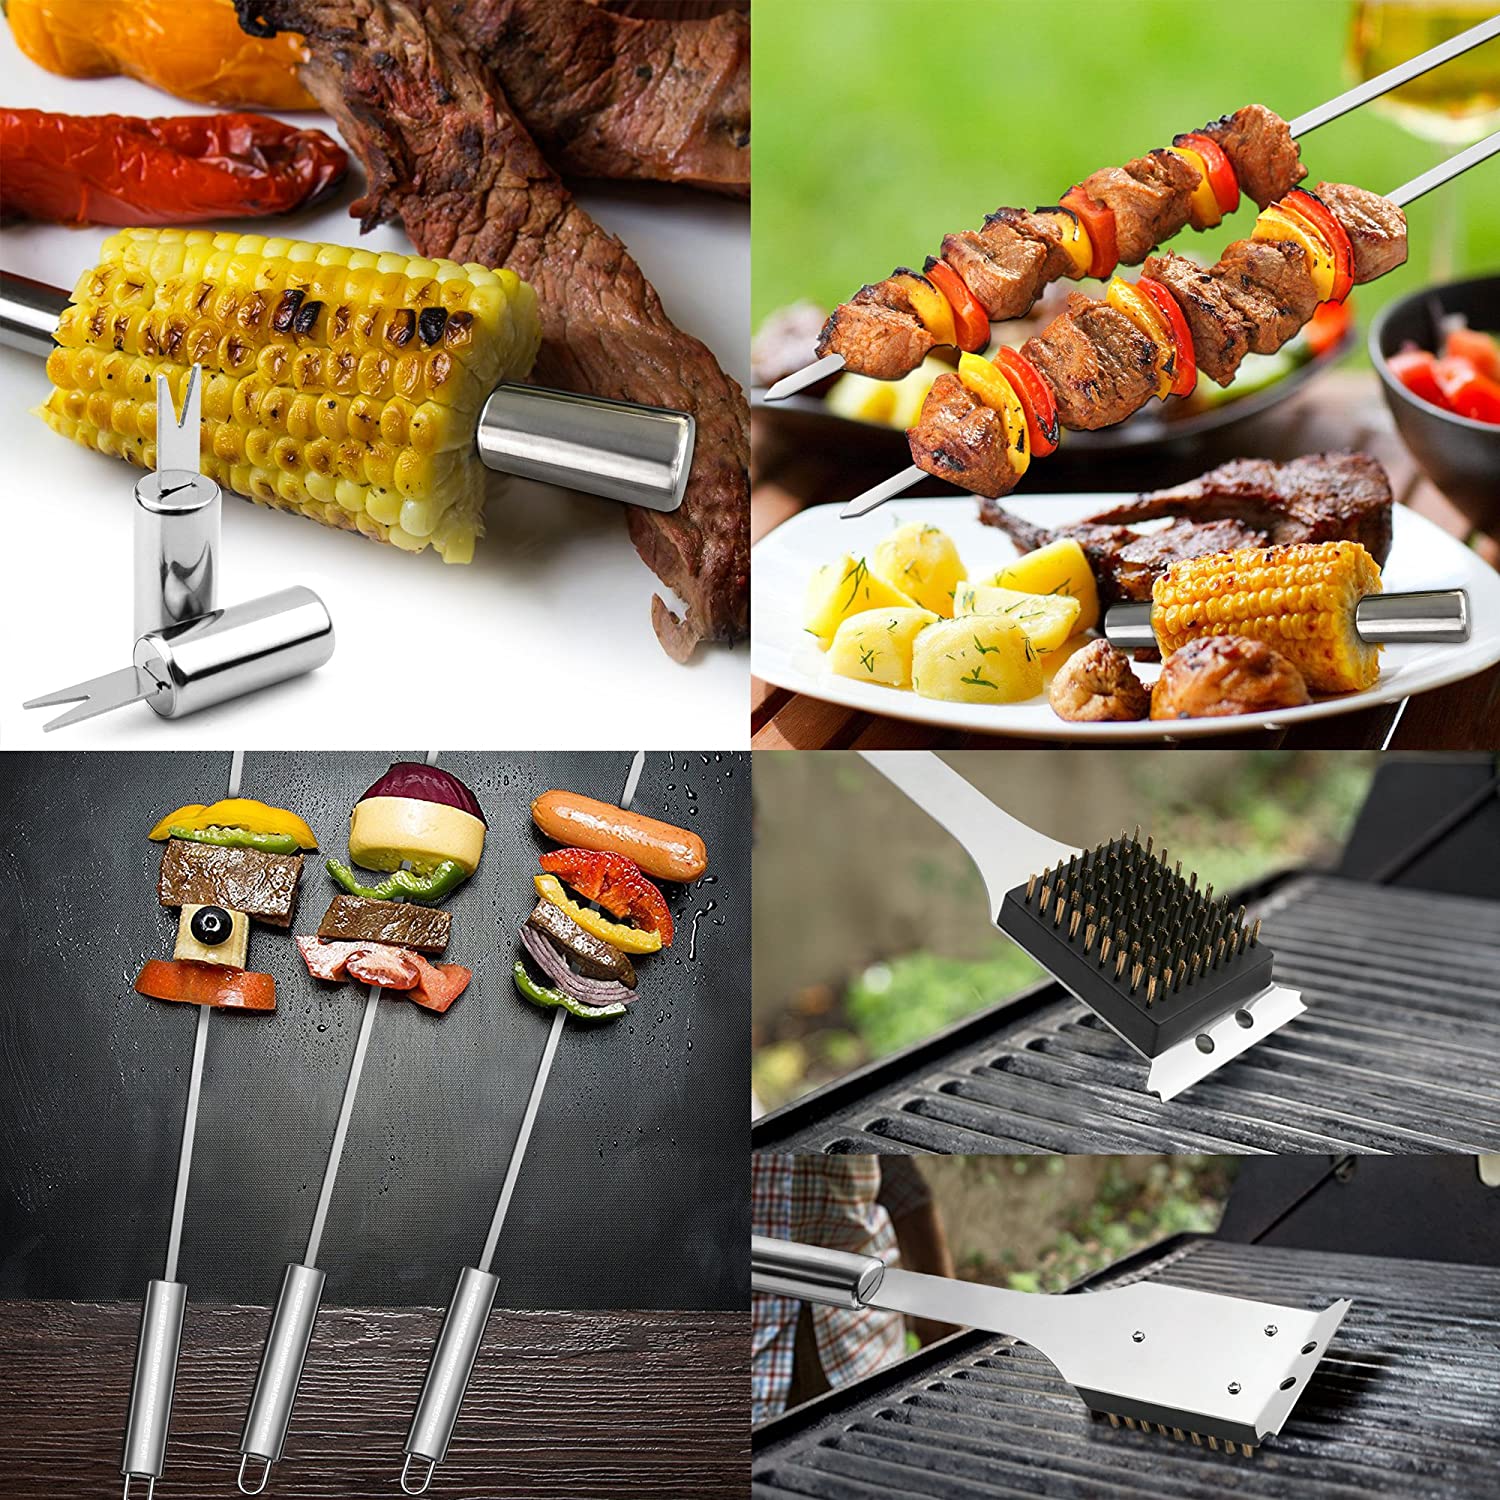 Grillart heavy duty bbq grill tools/ accessories stainless steel 4